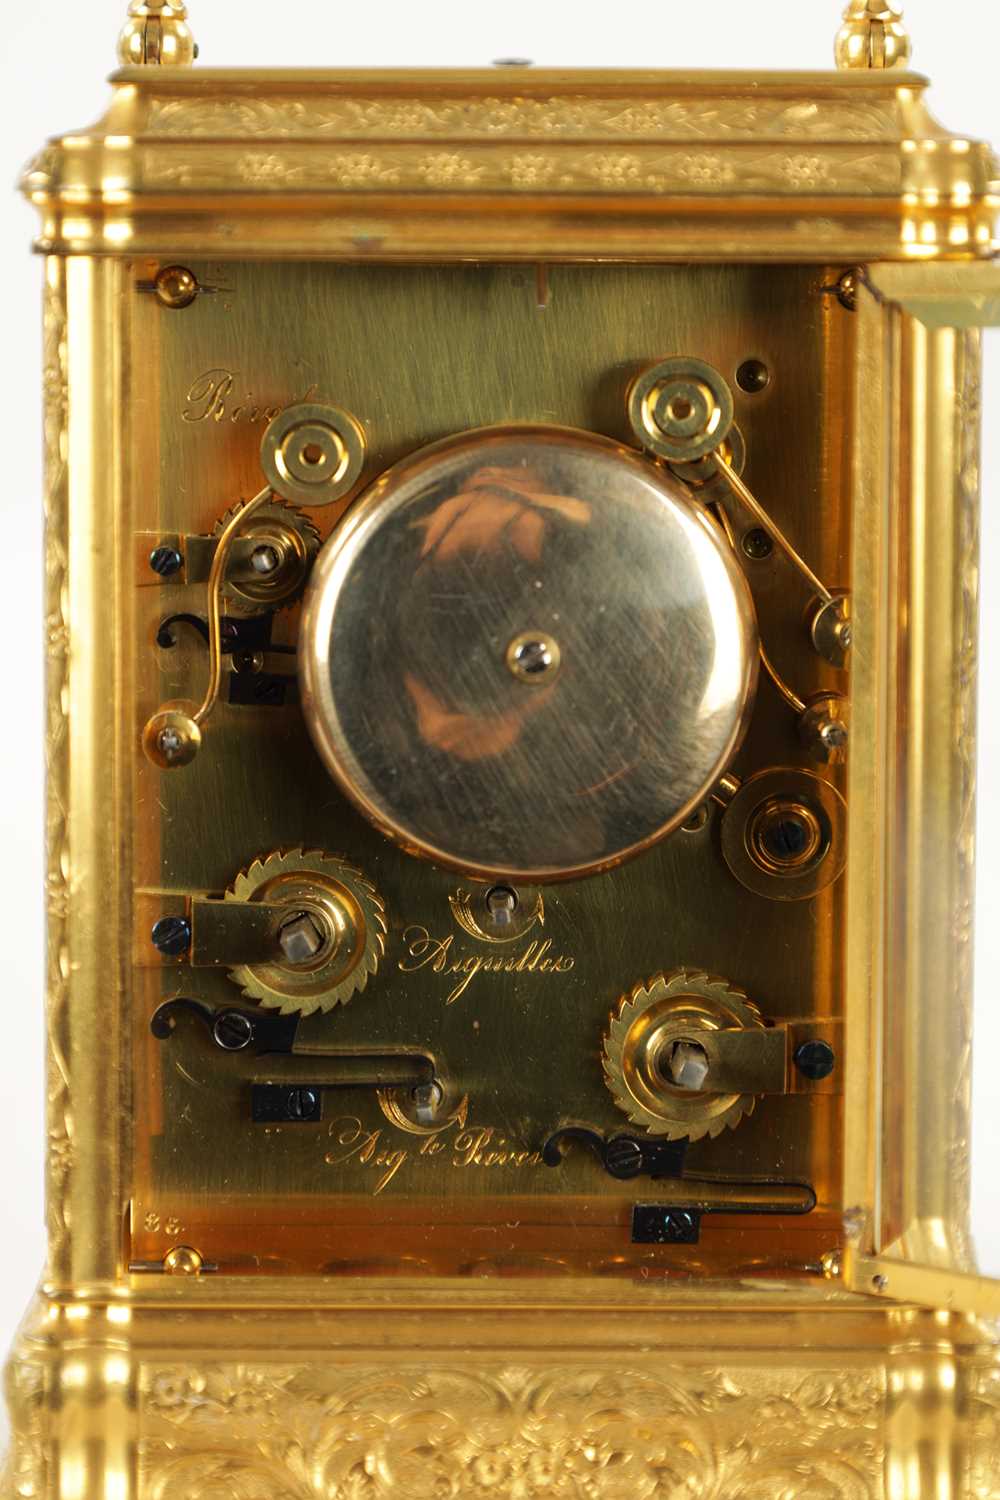 HENRI JACOT, PARIS. A LATE 19TH CENTURY FRENCH GRAND SONNERIE CARRIAGE CLOCK - Image 8 of 20